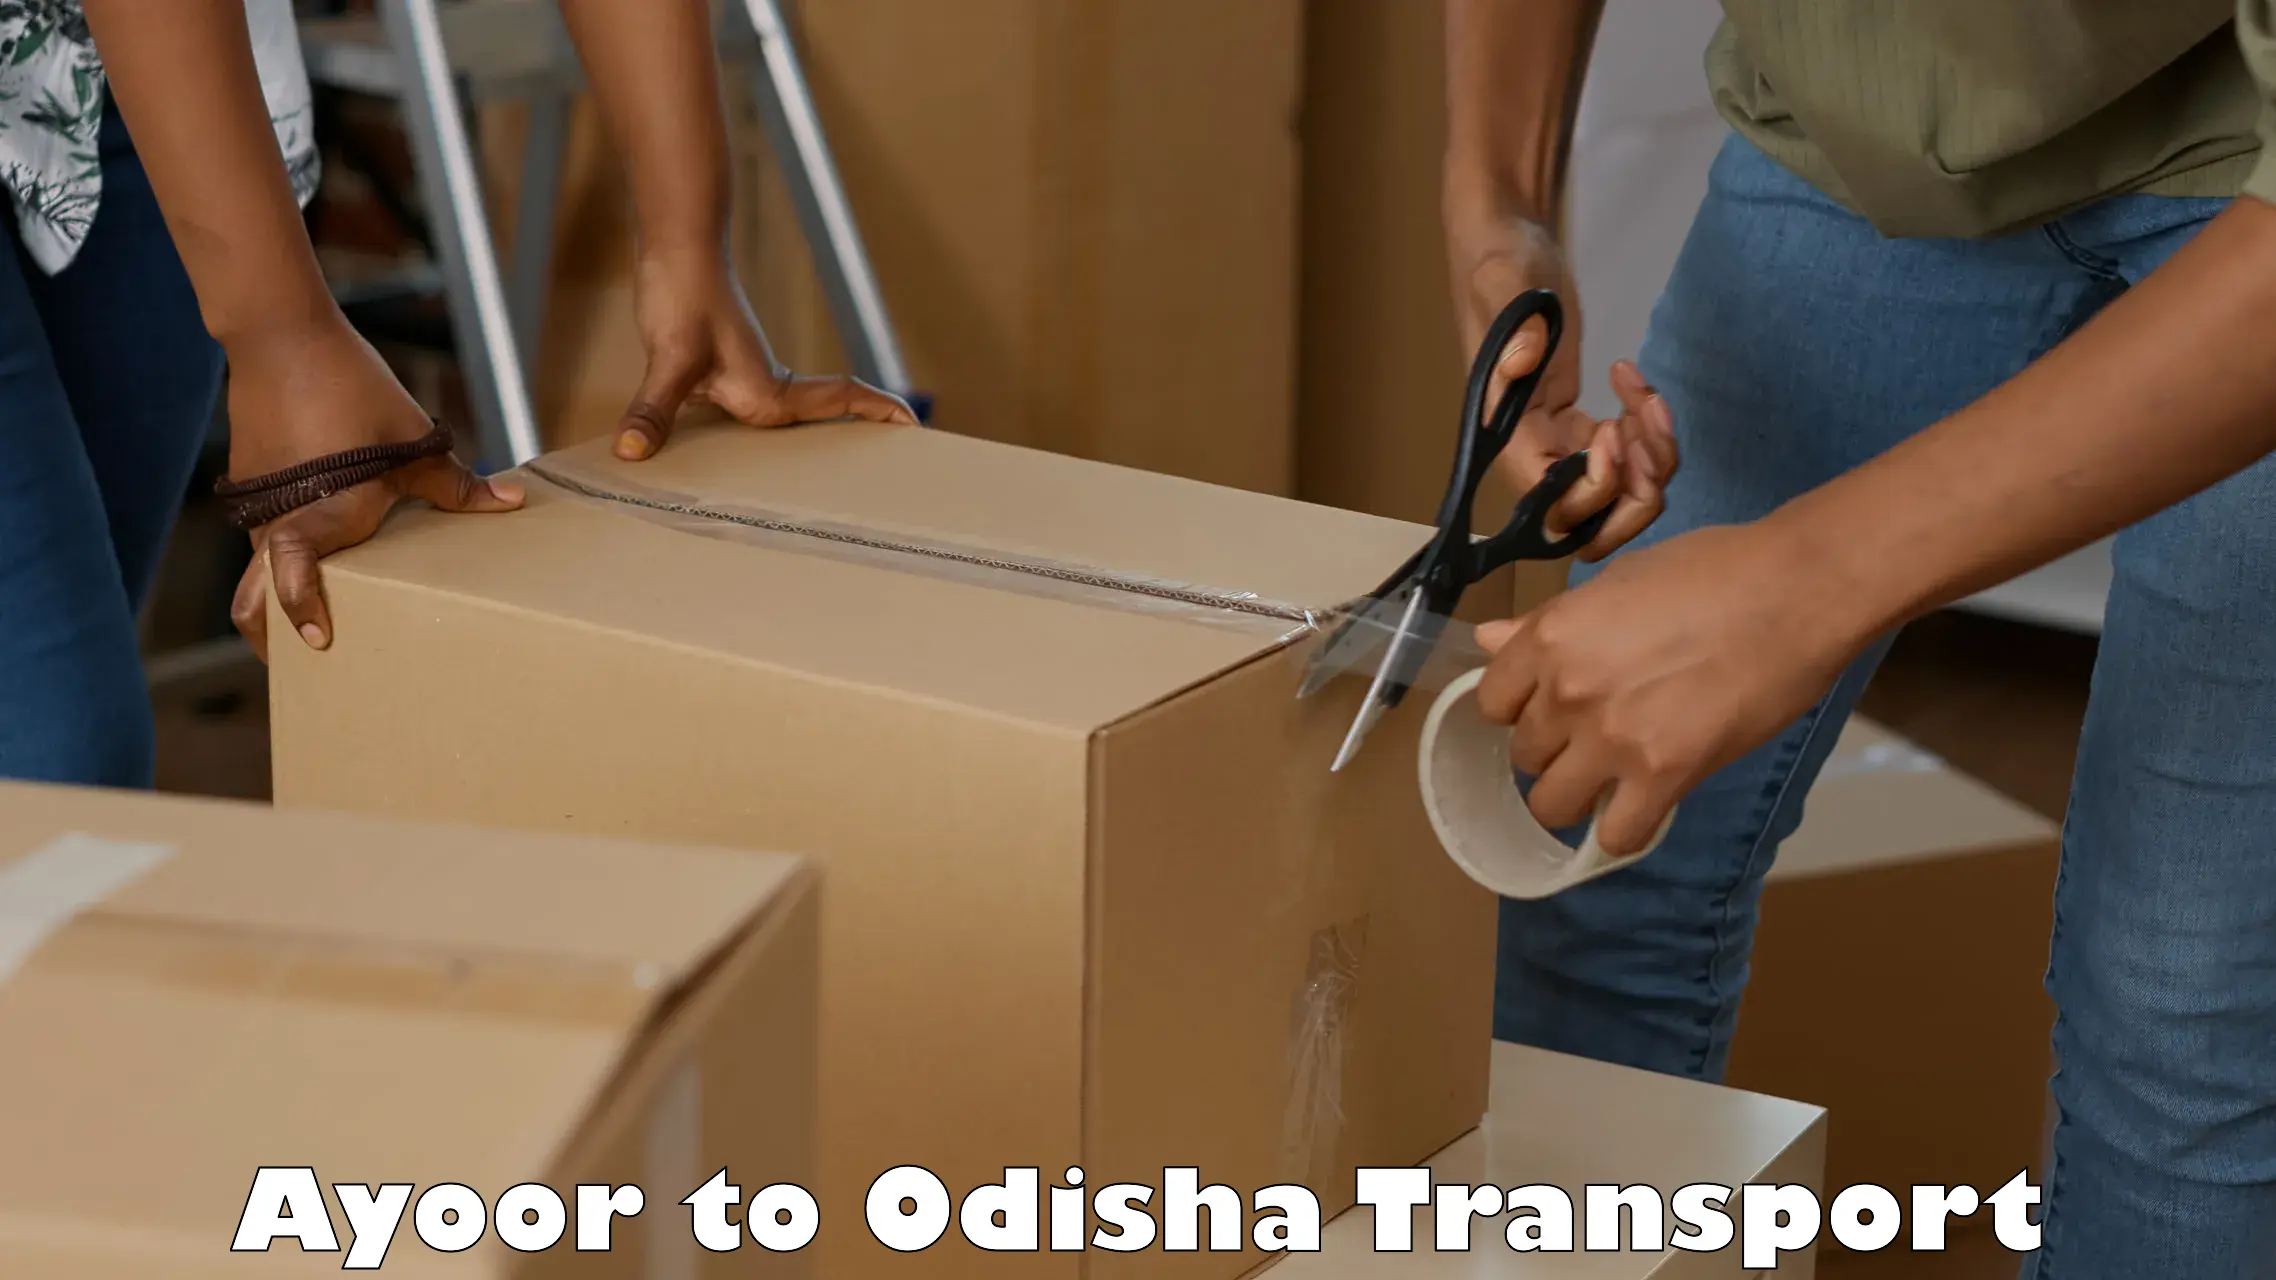 Container transport service Ayoor to Odisha